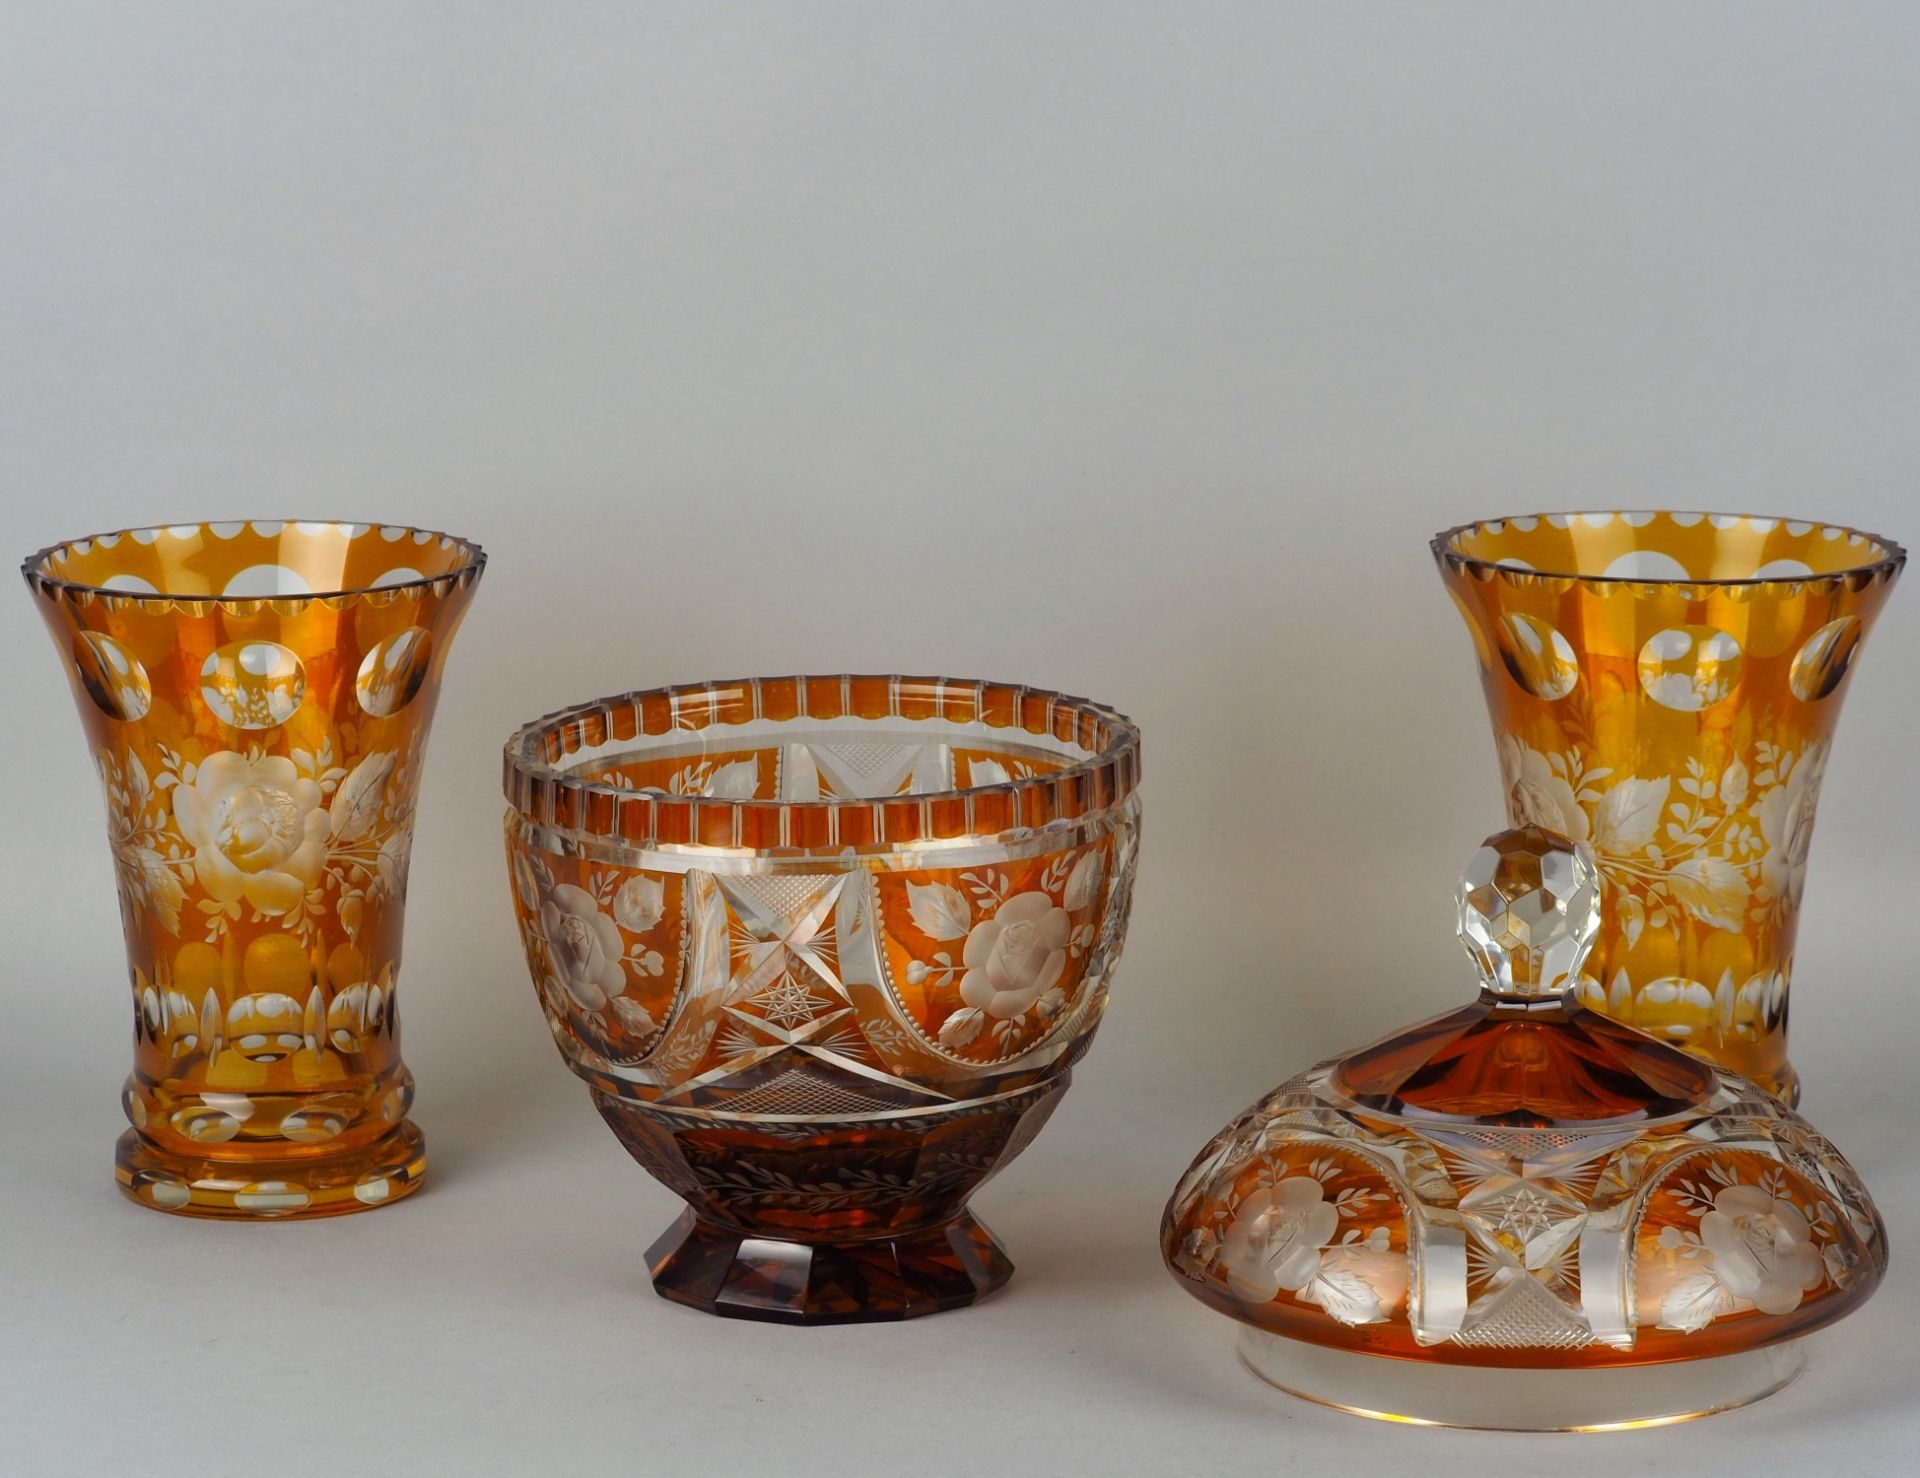 Two vases and one confectionary bowl with lid made of glass, Bohemia, mid-20th century.  - Image 2 of 2